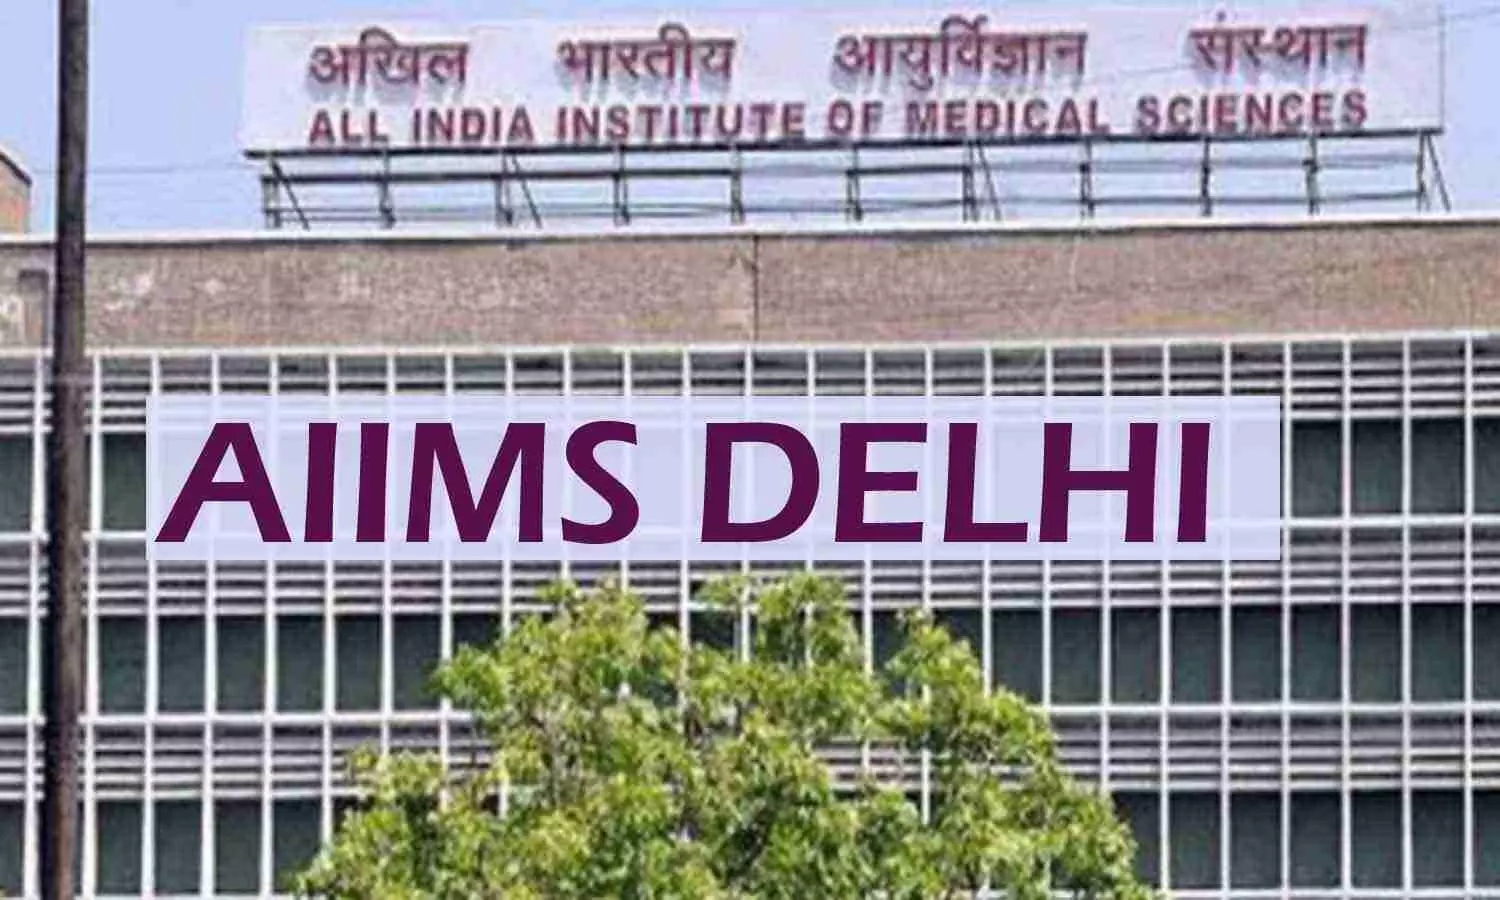 Relief to patients: AIIMS Delhi does away with appointments for X-rays